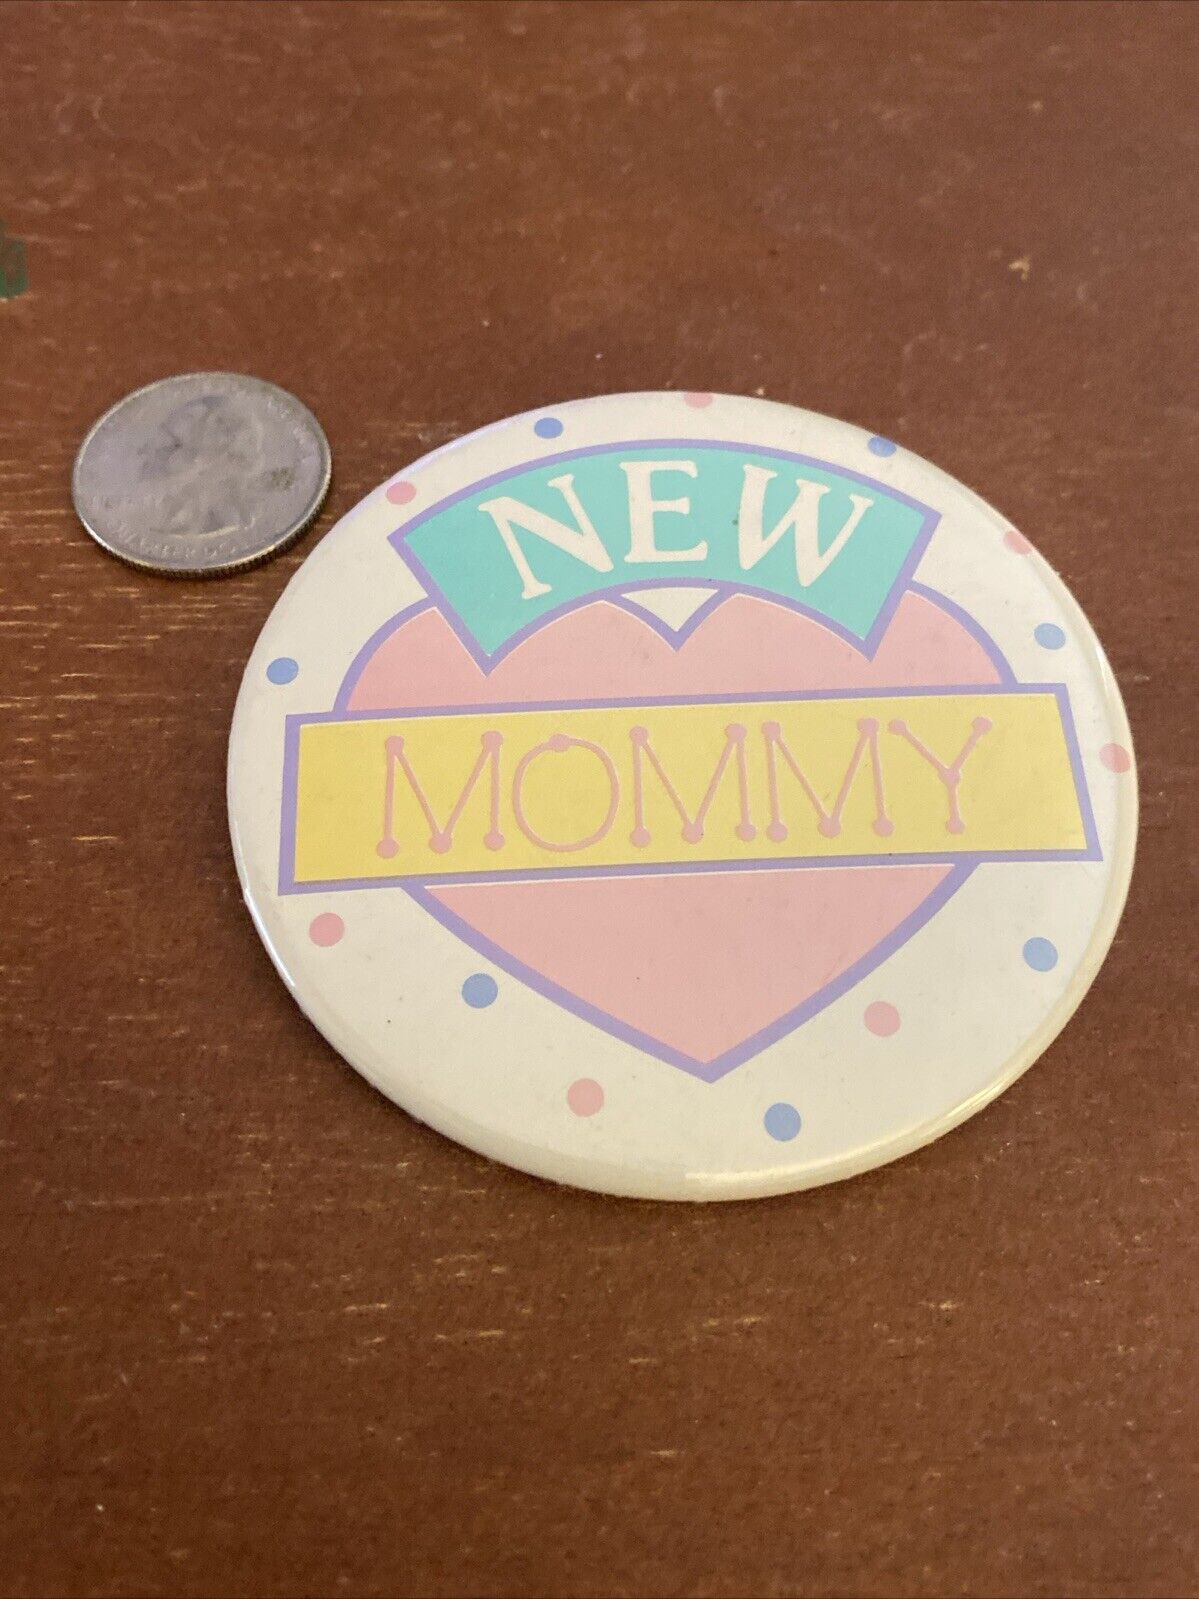 Vintage Novelty New Mommy Russ Berrie Co. 1980s Style